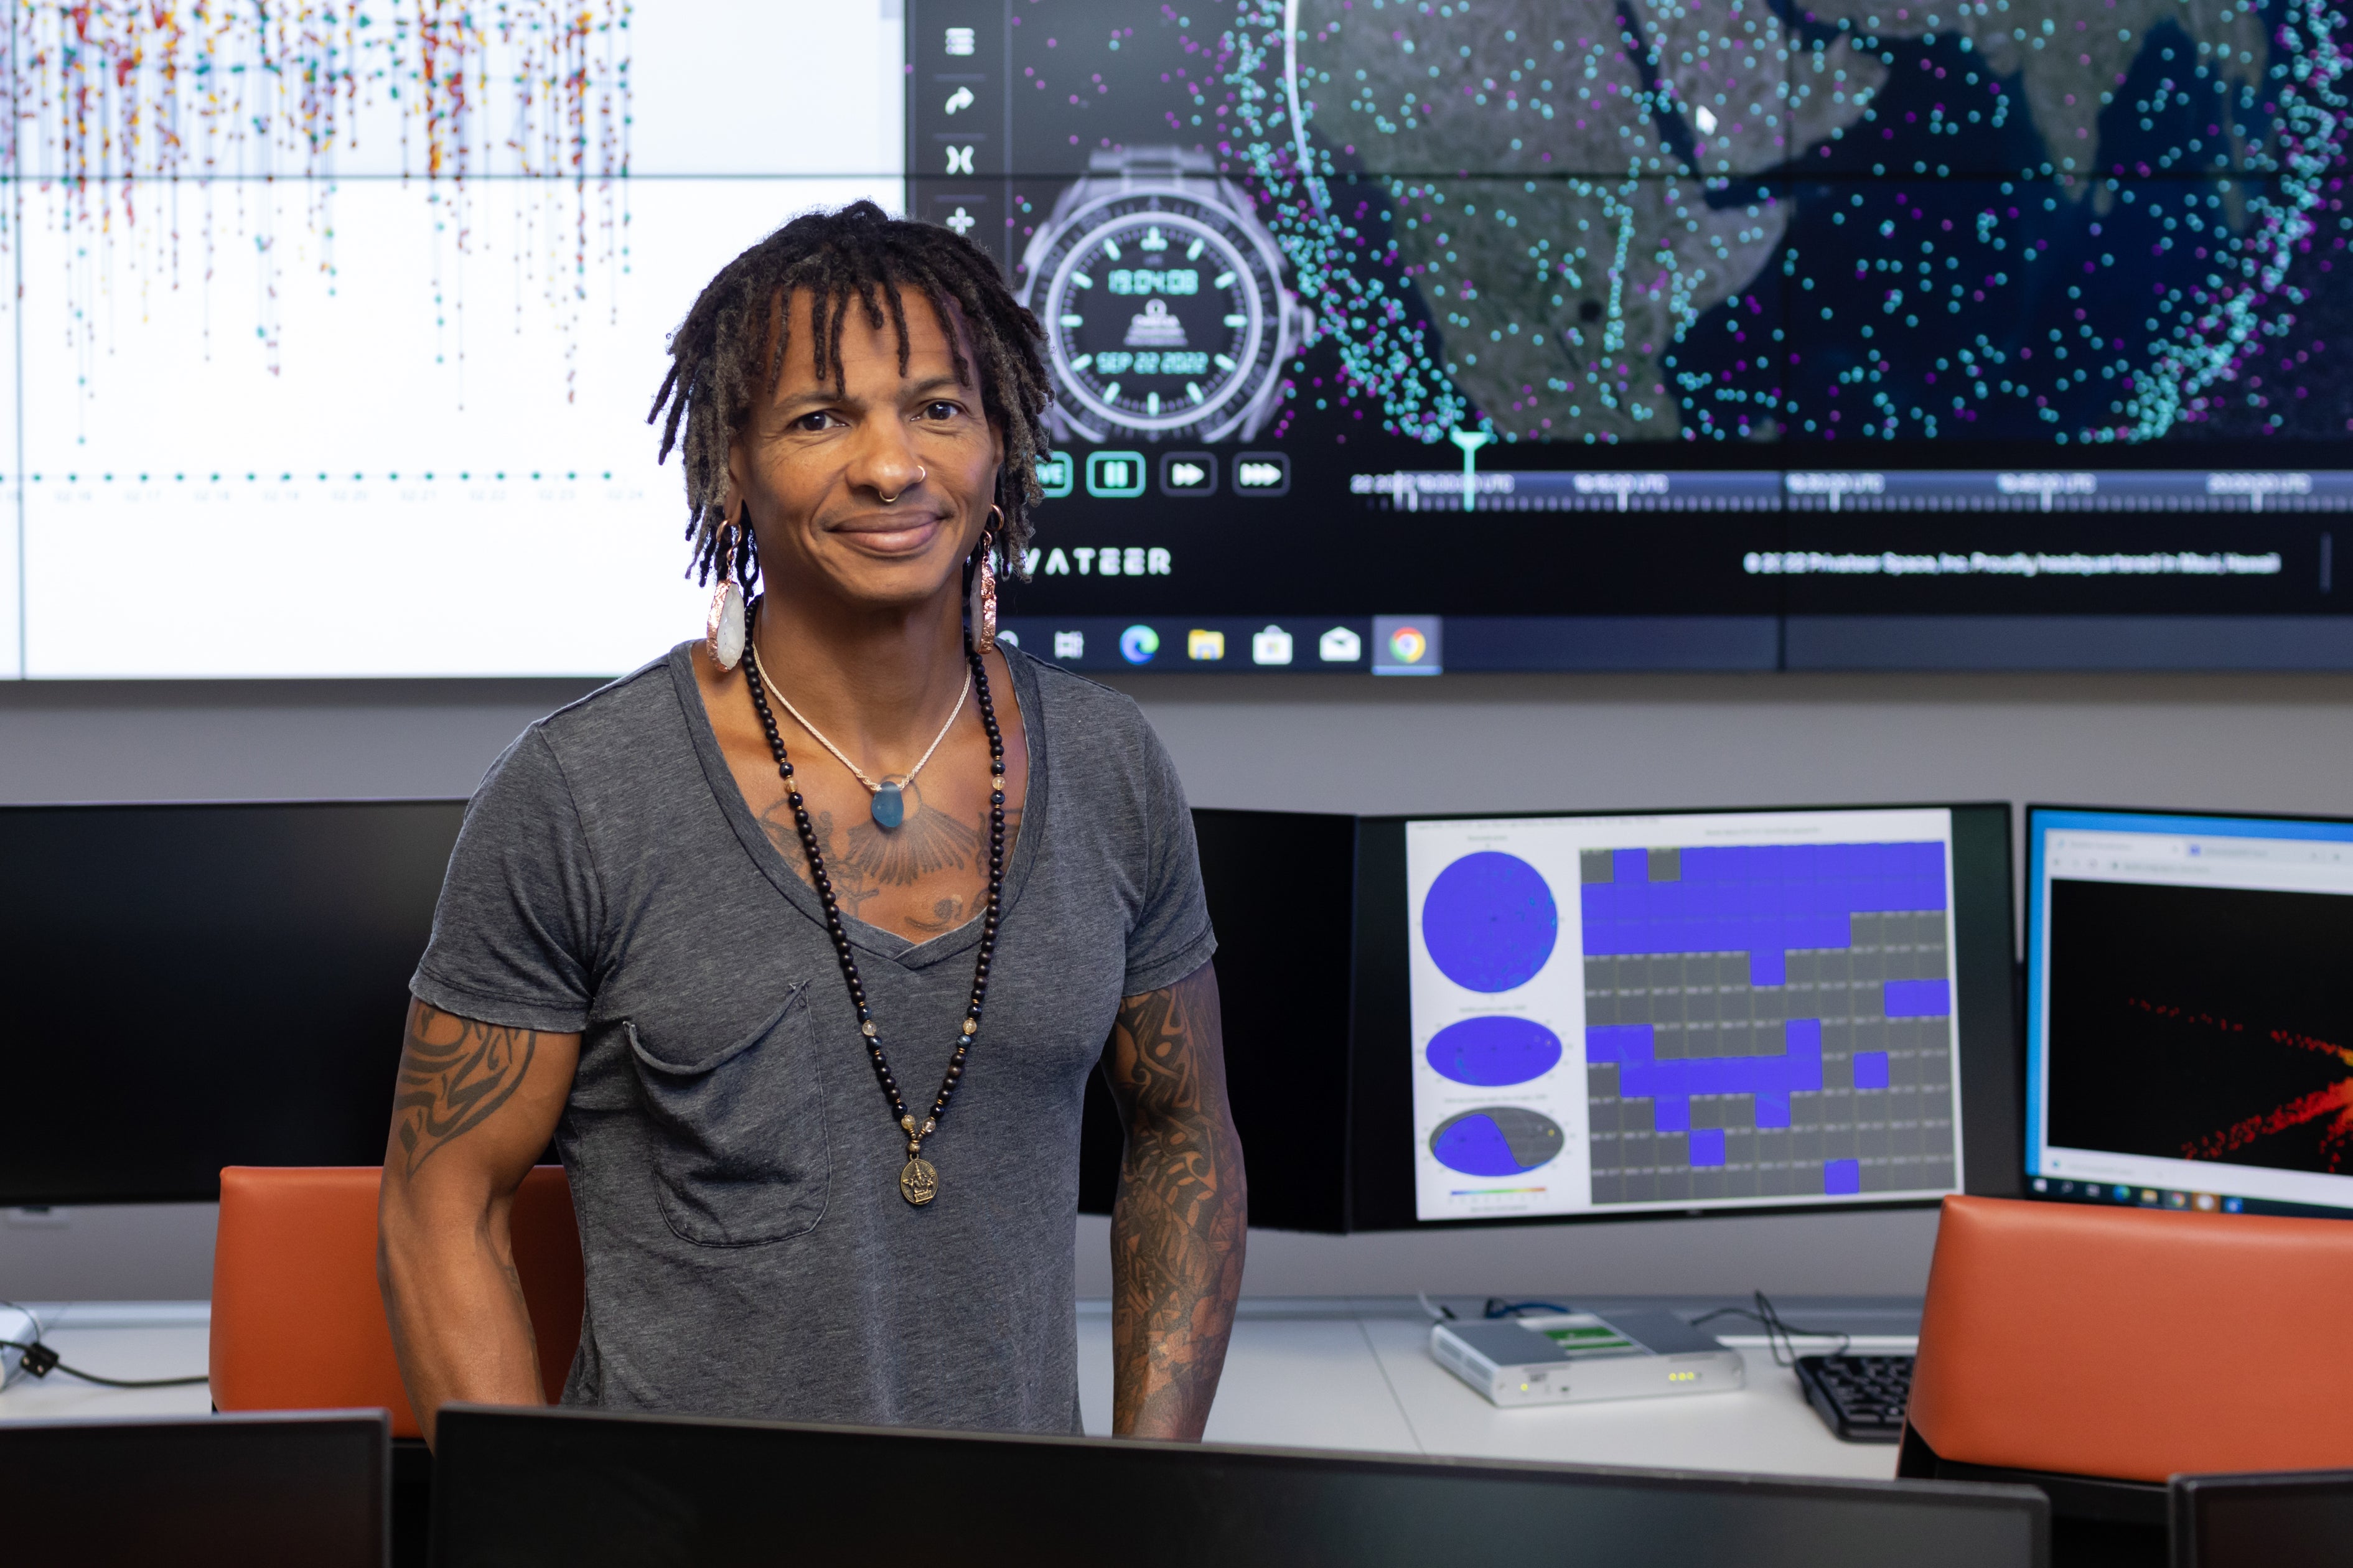 A man with dreadlocks and earrings stands amidst an array of computers and video screens showing sciencey stuff.